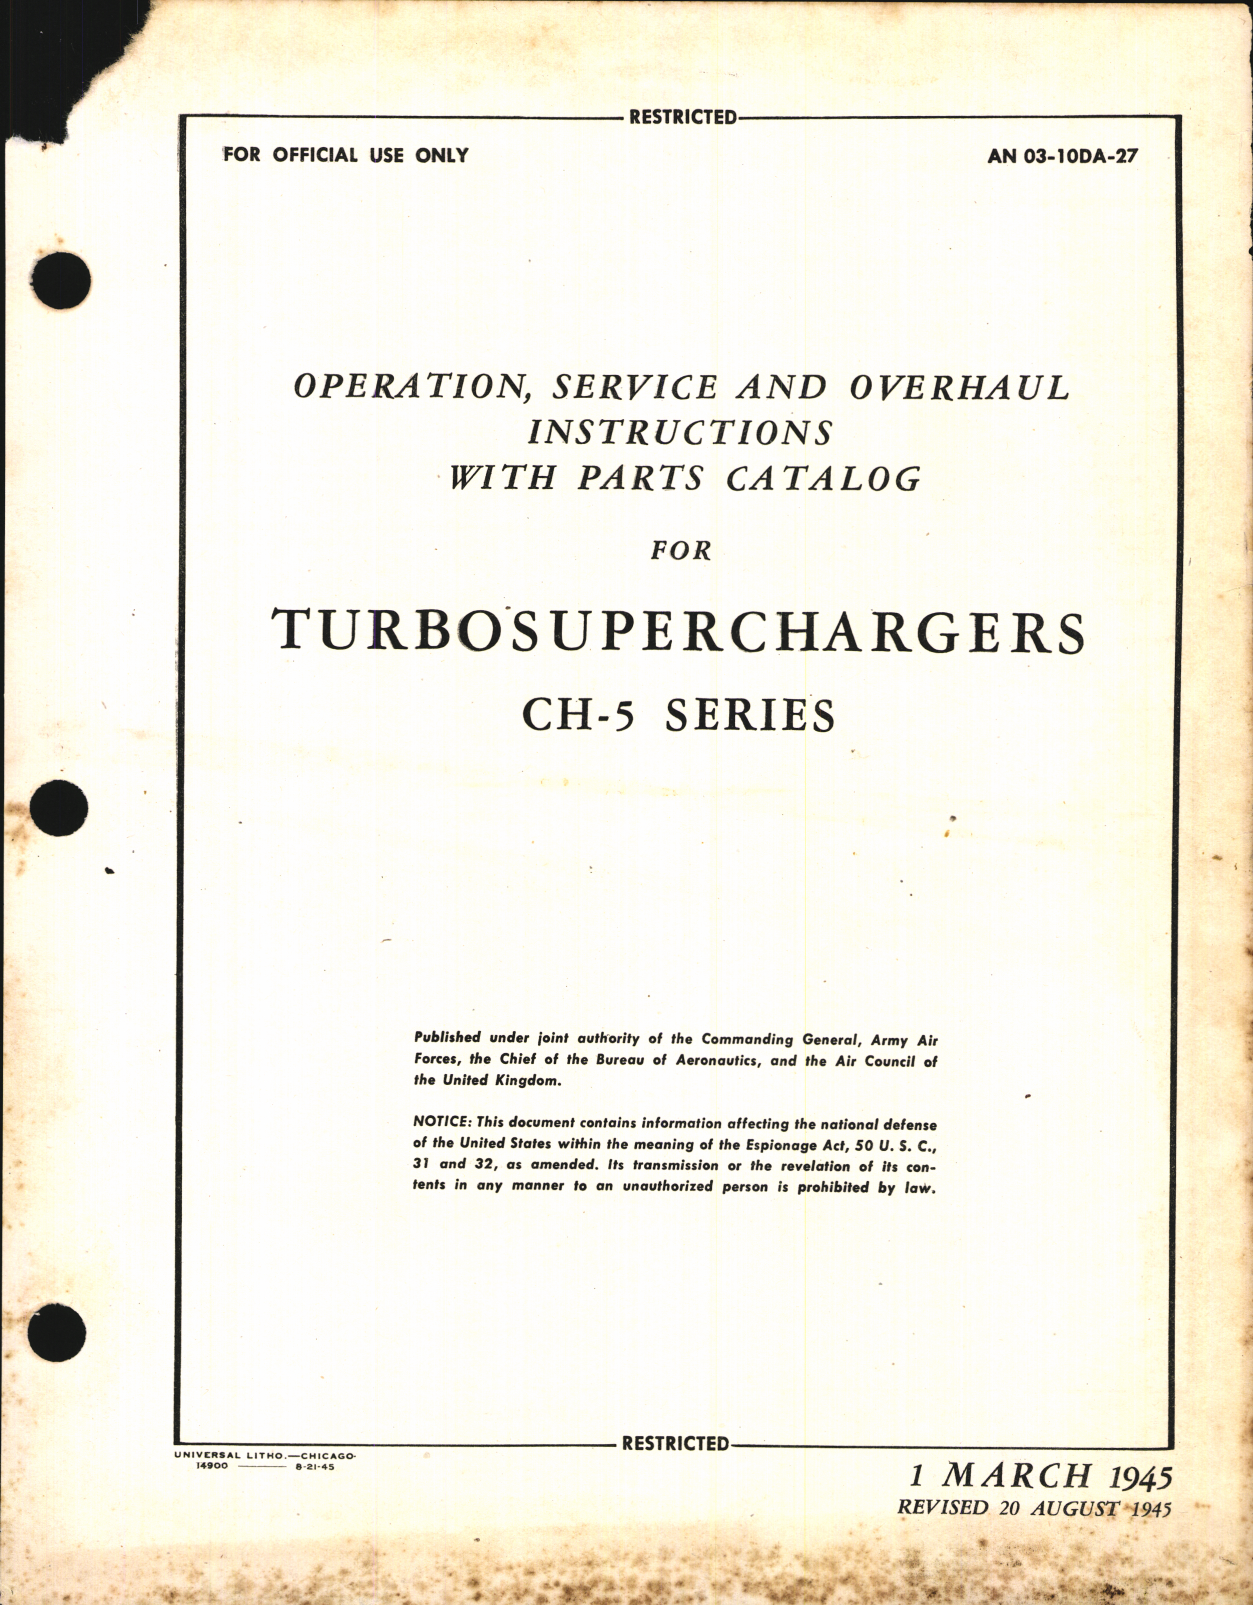 Sample page 1 from AirCorps Library document: Operation, Service, & Overhaul Instructions with Parts Catalog for Turbosuperchargers CH-5 Series